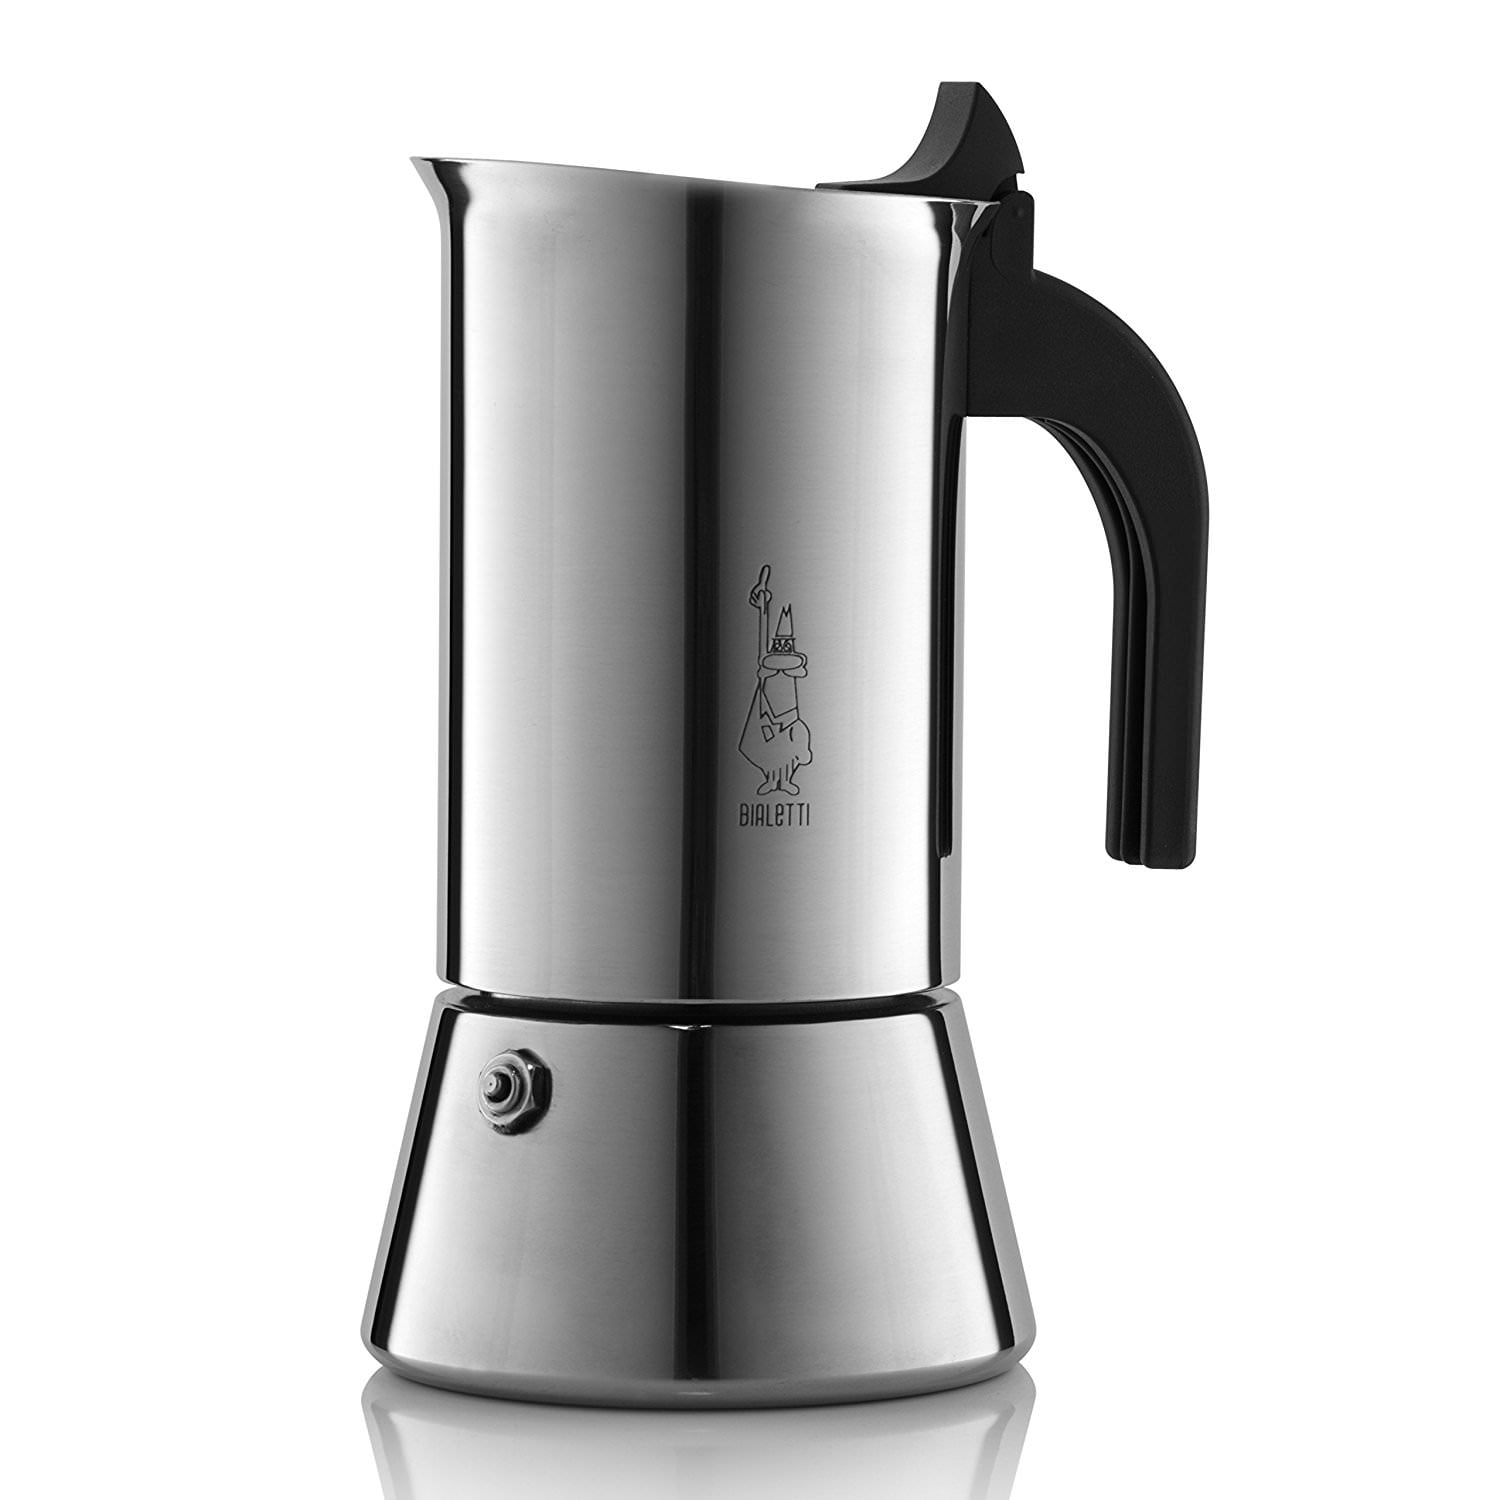 Bialetti Venus 2 Cup Stainless Steel Stovetop Espresso Maker 